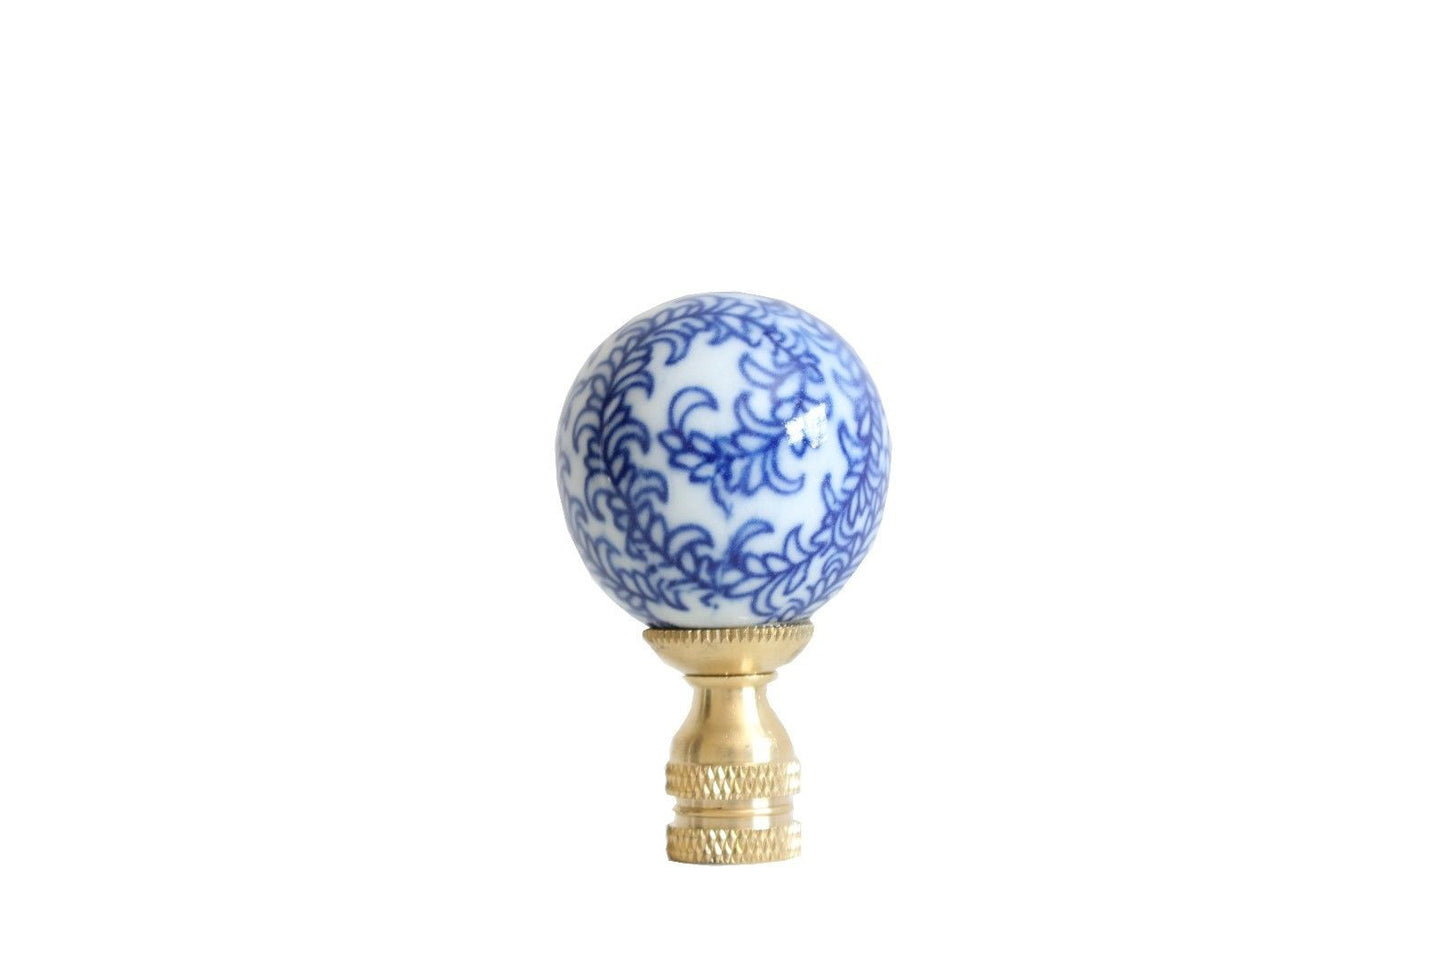 Beautiful Blue and White Floral Motif Porcelain Ball Finial